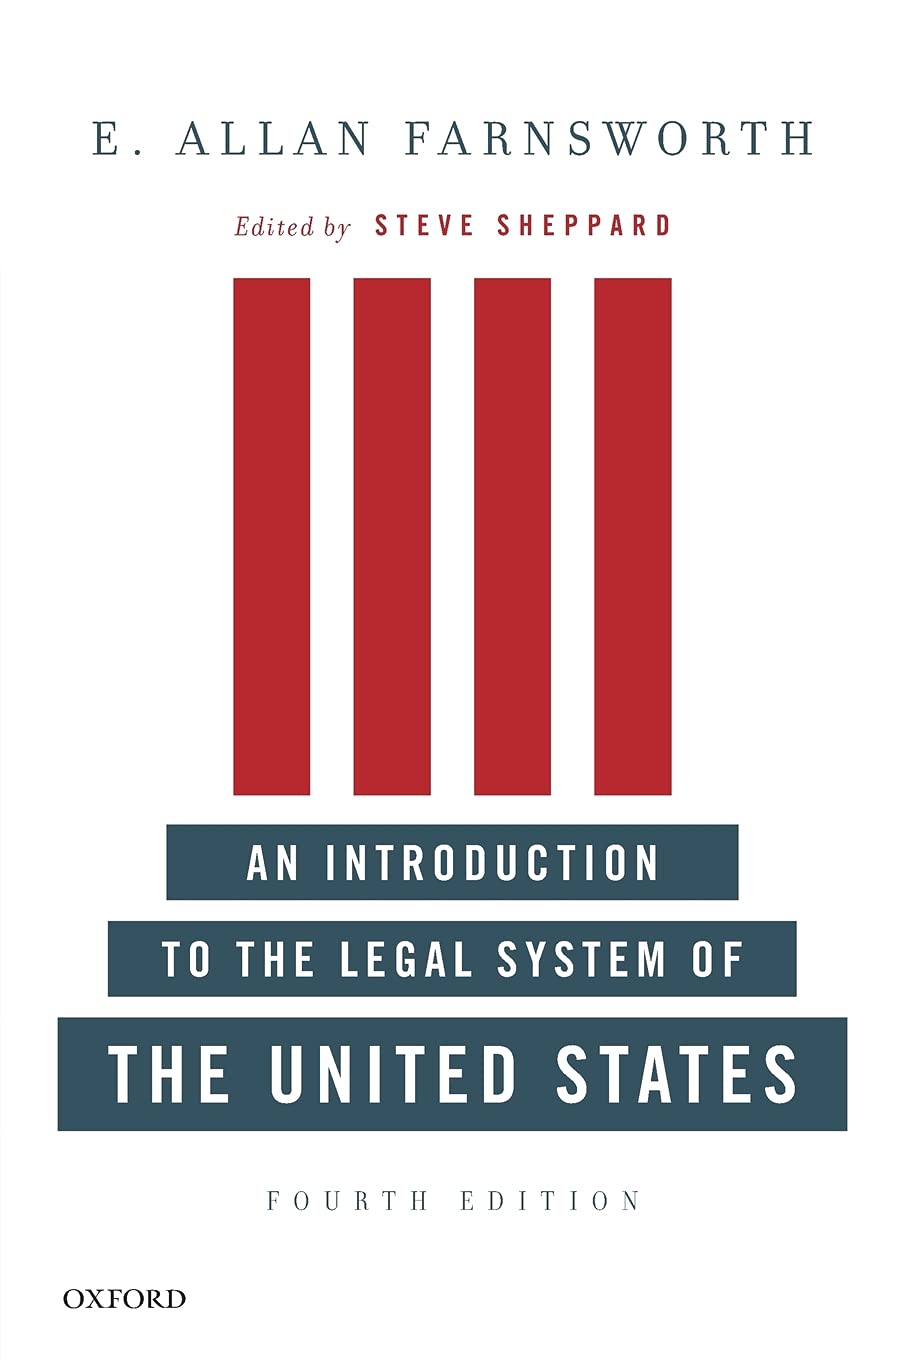 An Introduction to the Legal System of the United States, Fourth Edition